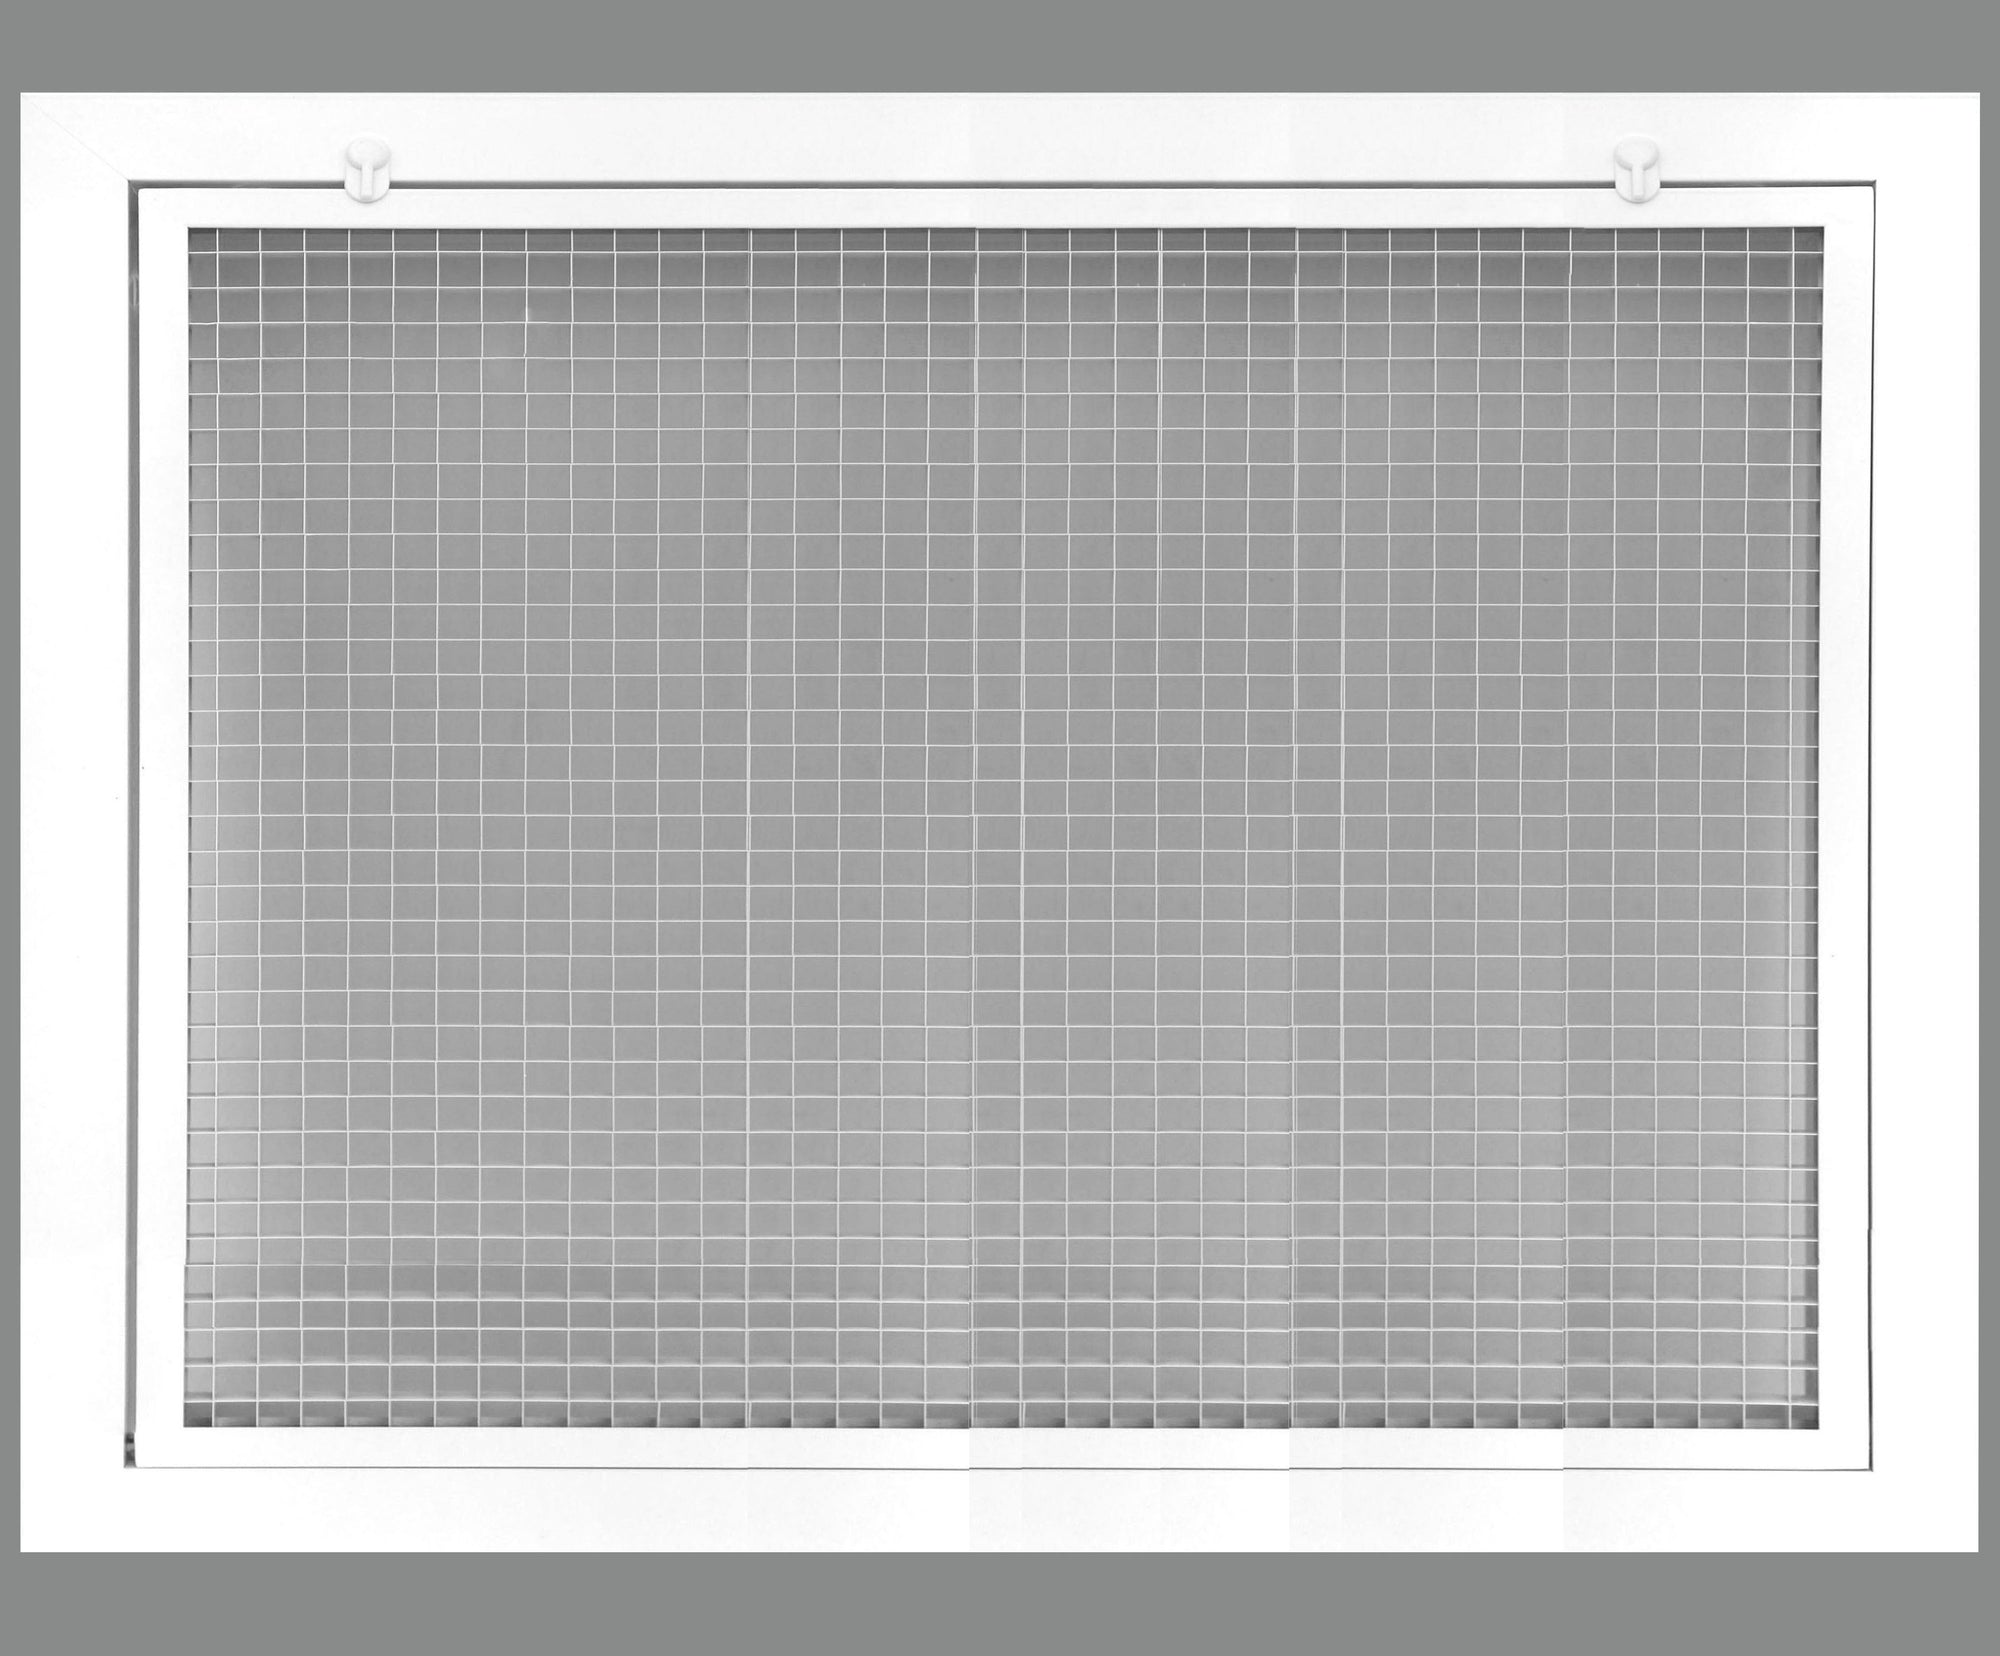 36" x 32" Cube Core Eggcrate Return Air Filter Grille for 1" Filter